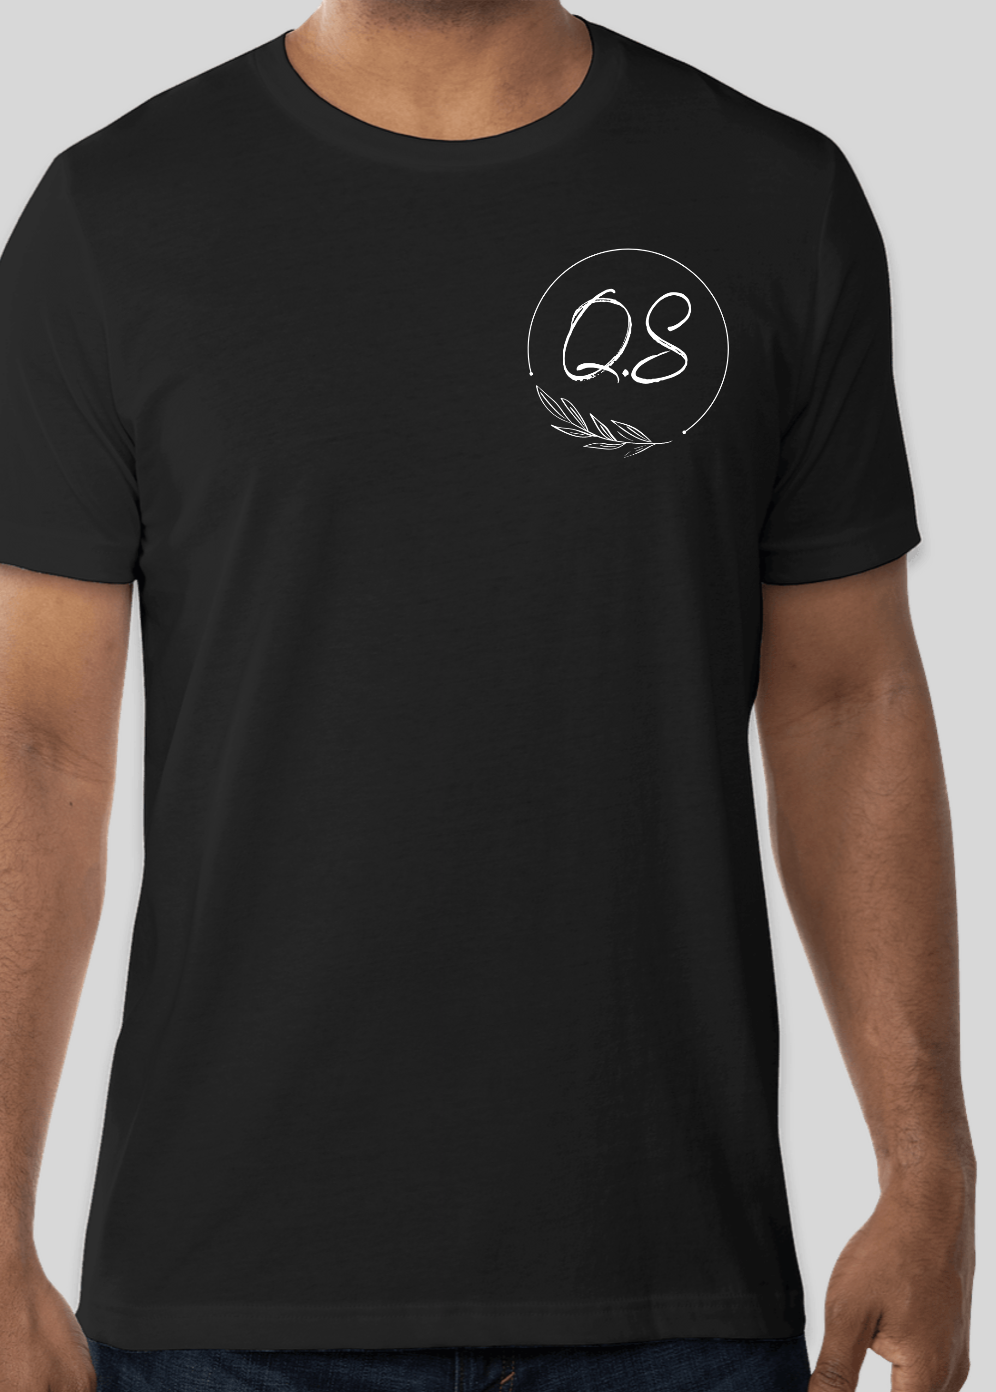 QS T-shirt | Quality Sweets By Shande